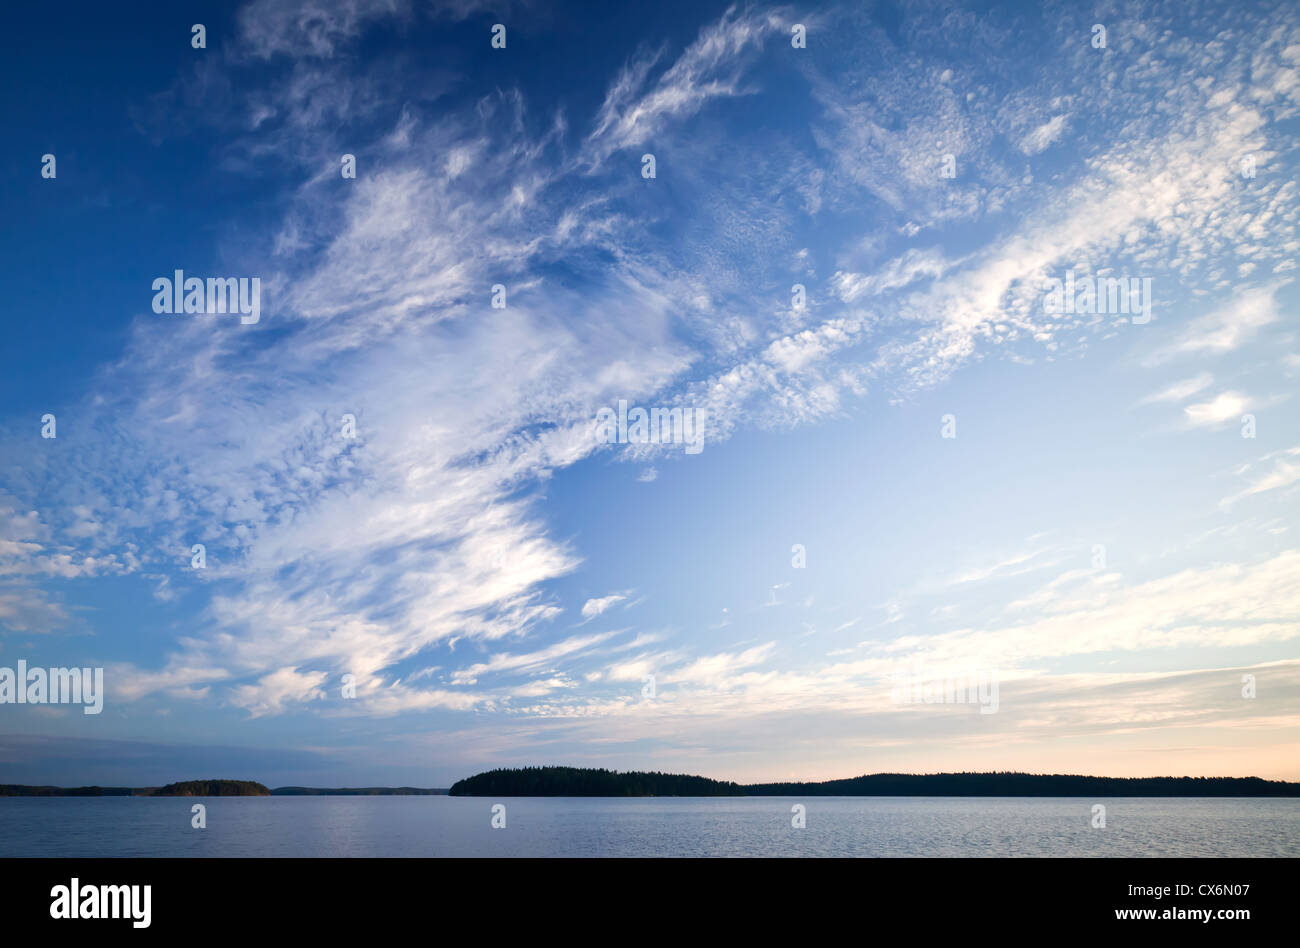 Coastline of the lake with beautiful cloudy sky above this Stock Photo